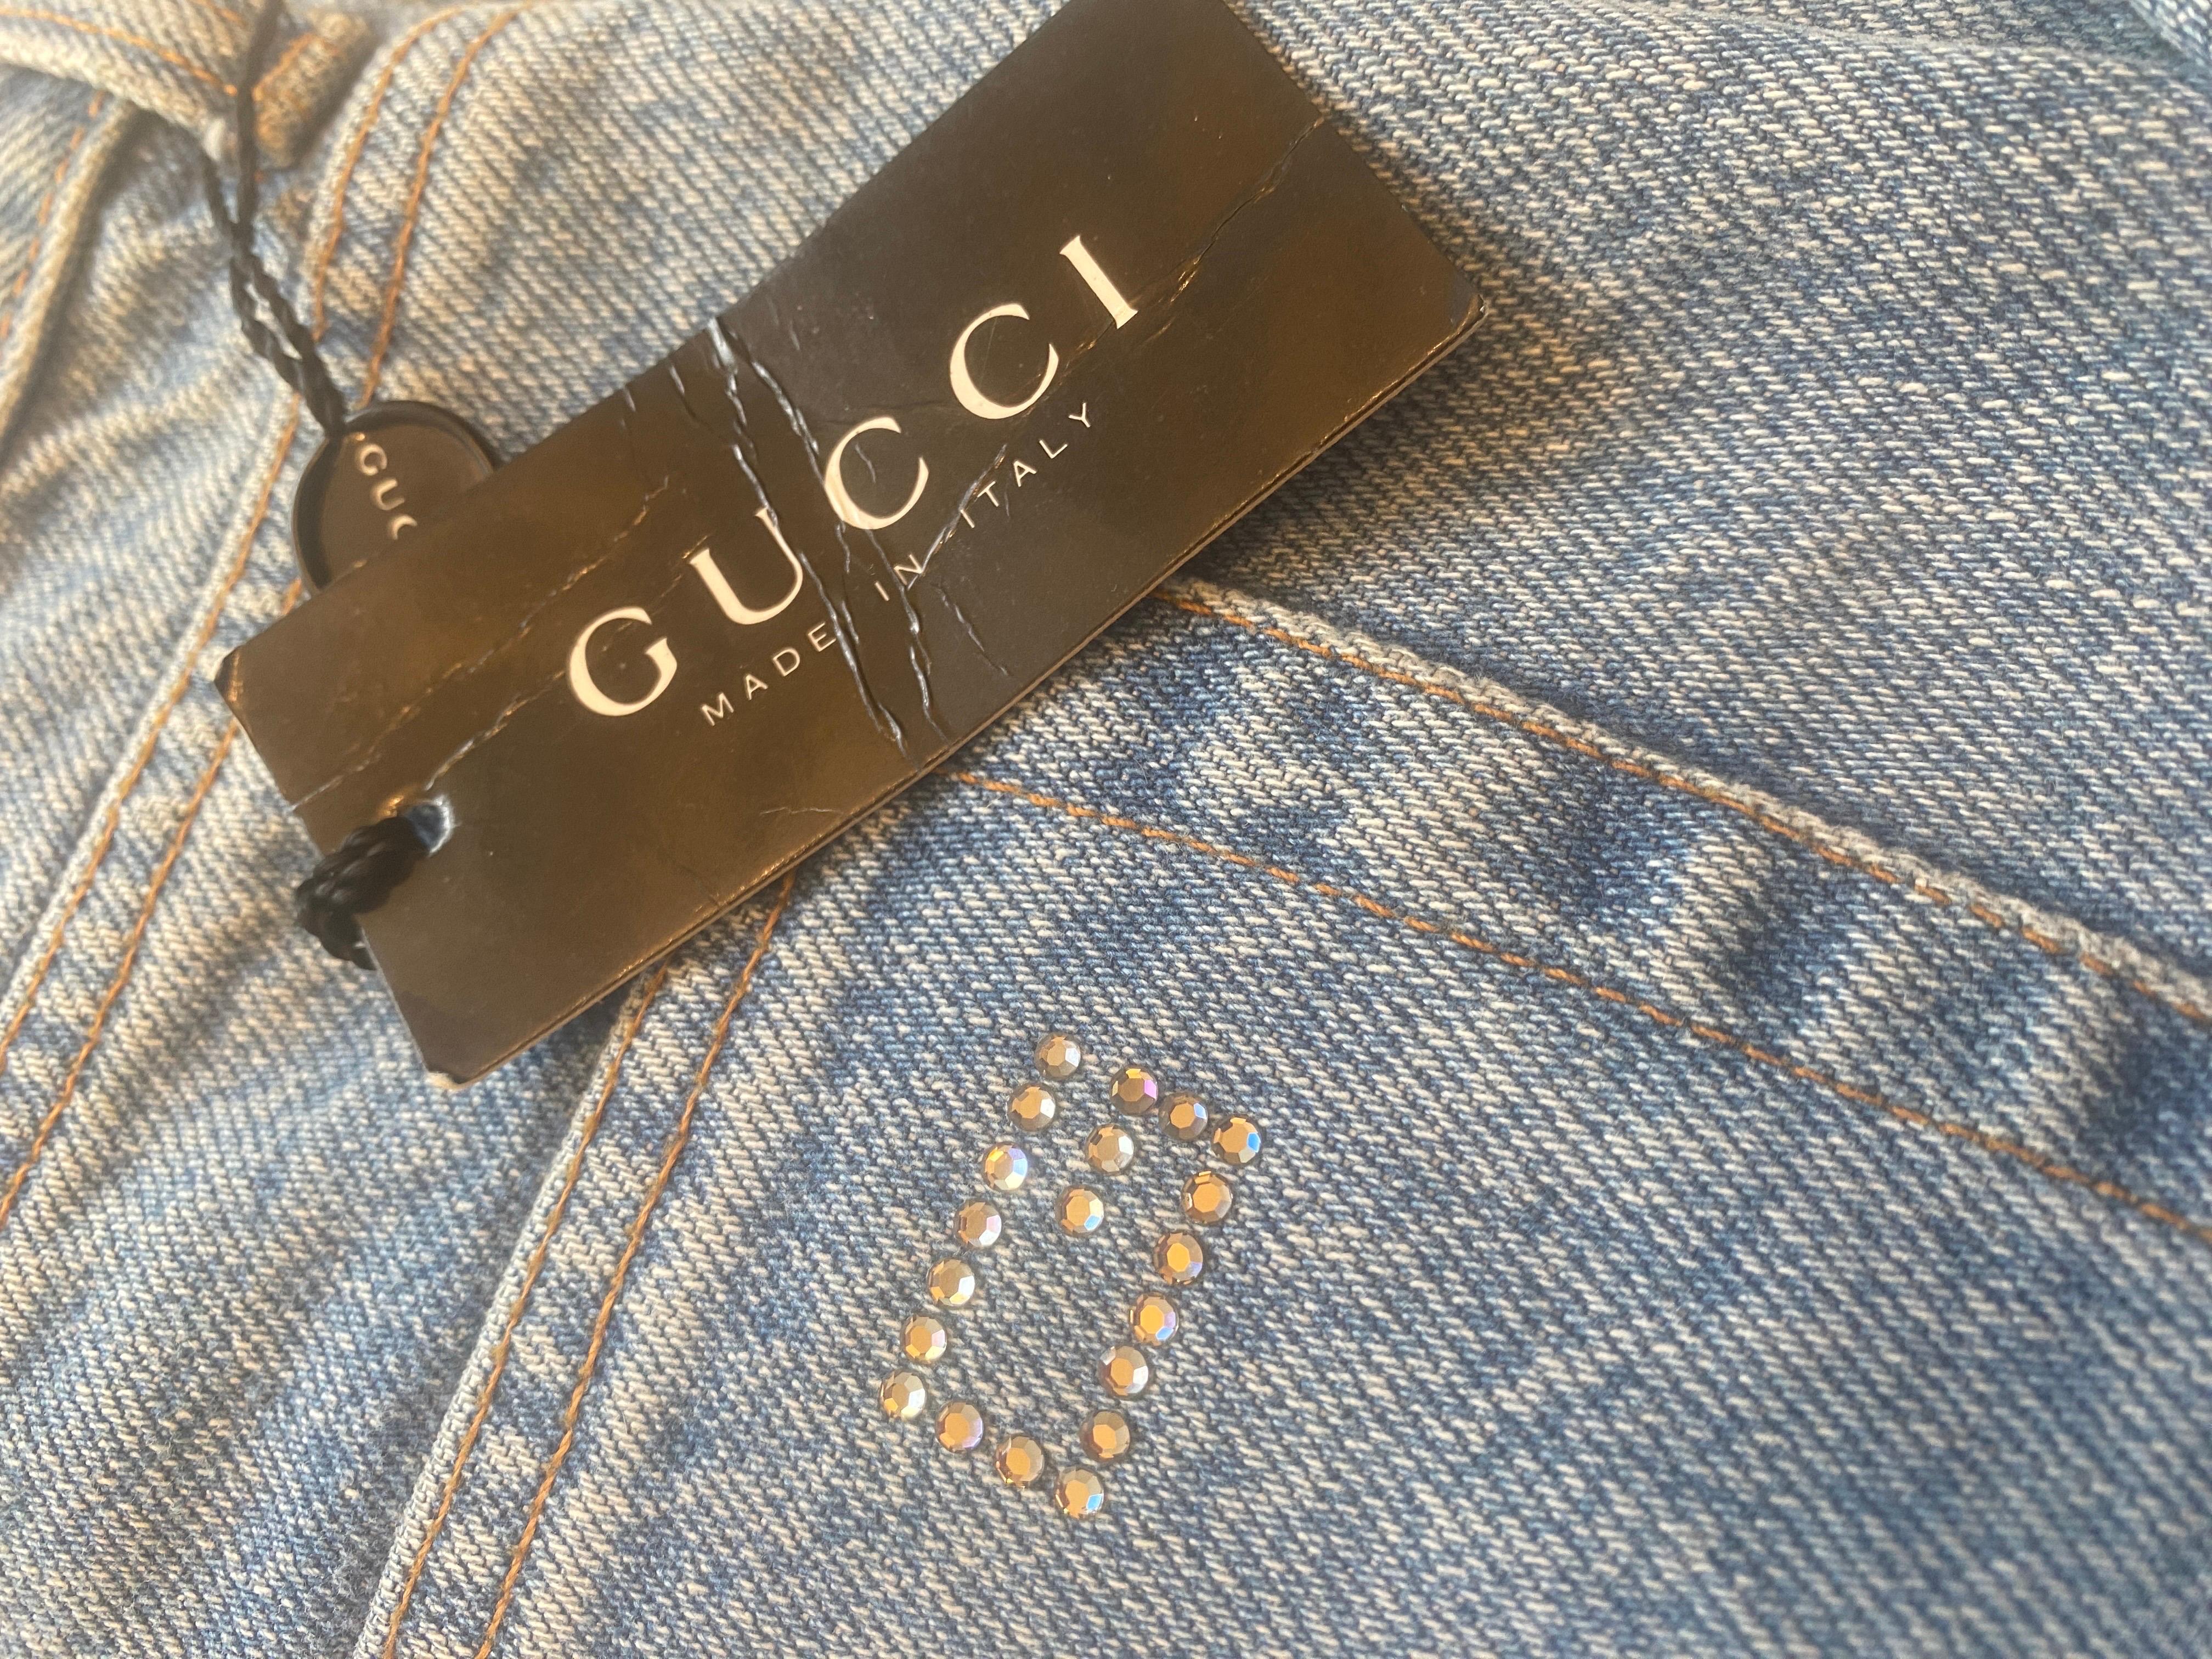 When these jeans came out, they were so hard to get you literally had to know a sales person at the Gucci store in Beverly Hills to call you as soon as they arrived. That’s how desirable they were. This tare pair survivors were in a fashionista’s